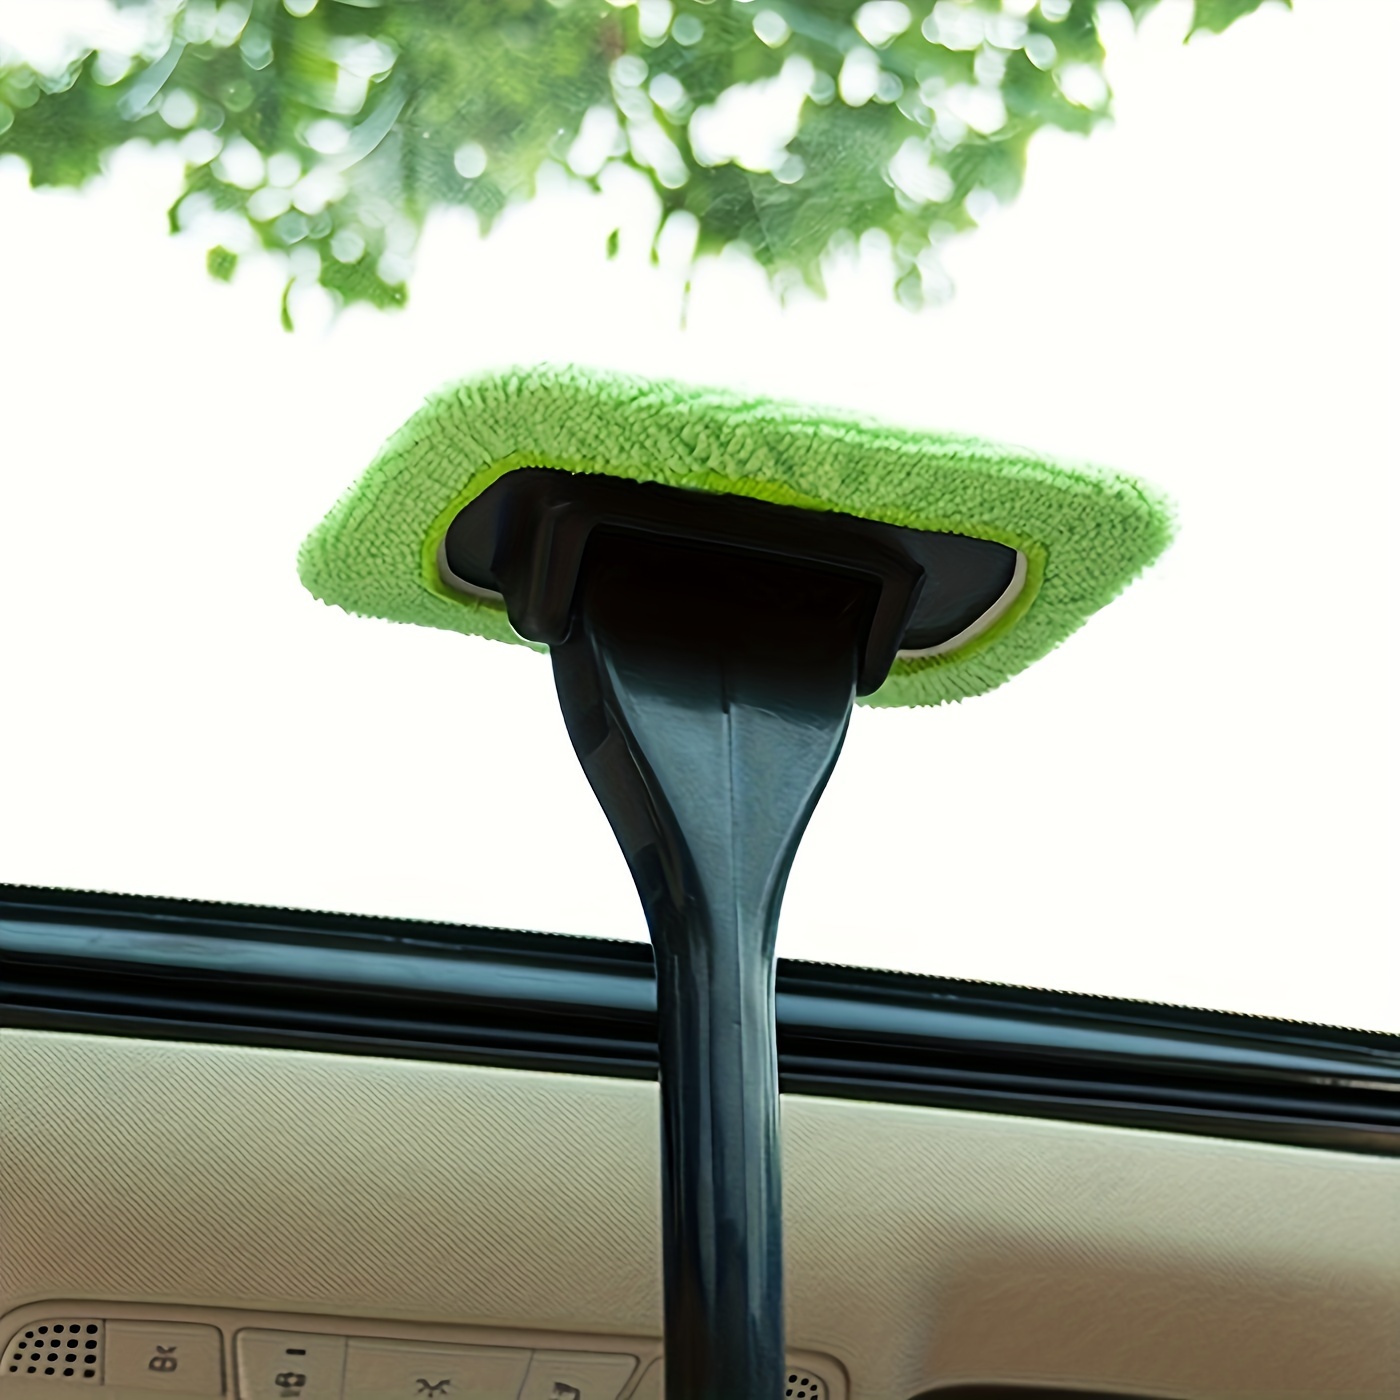 Car Windshield Cleaning Window Cleaner Brush Tool with Handle for Computers  Cleaning Brush